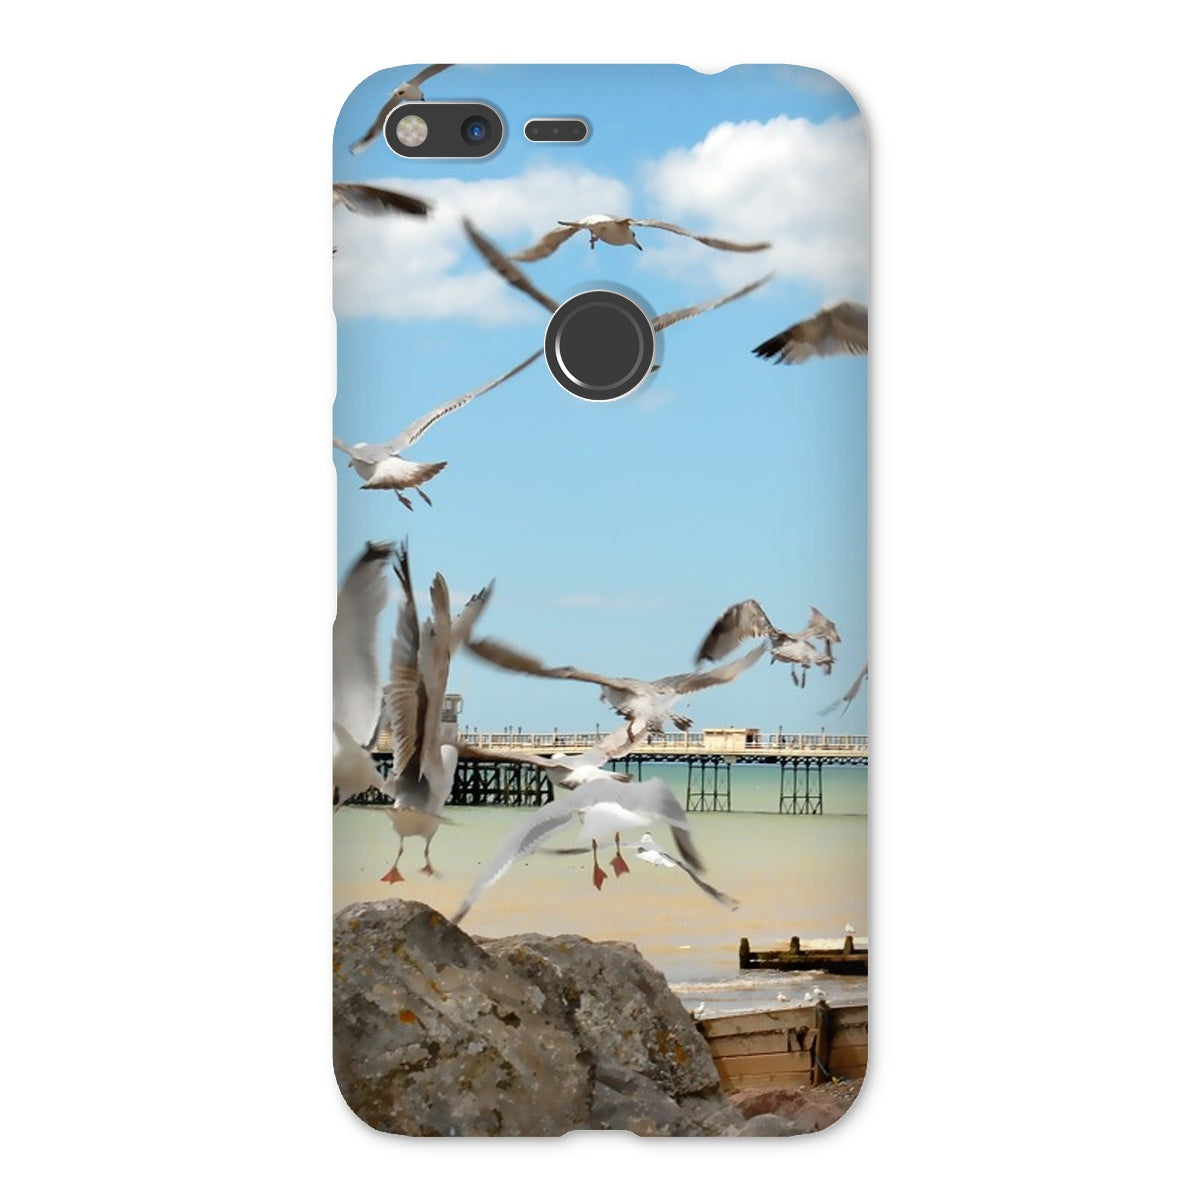 Seagulls At Feeding Time By David Sawyer Snap Phone Case